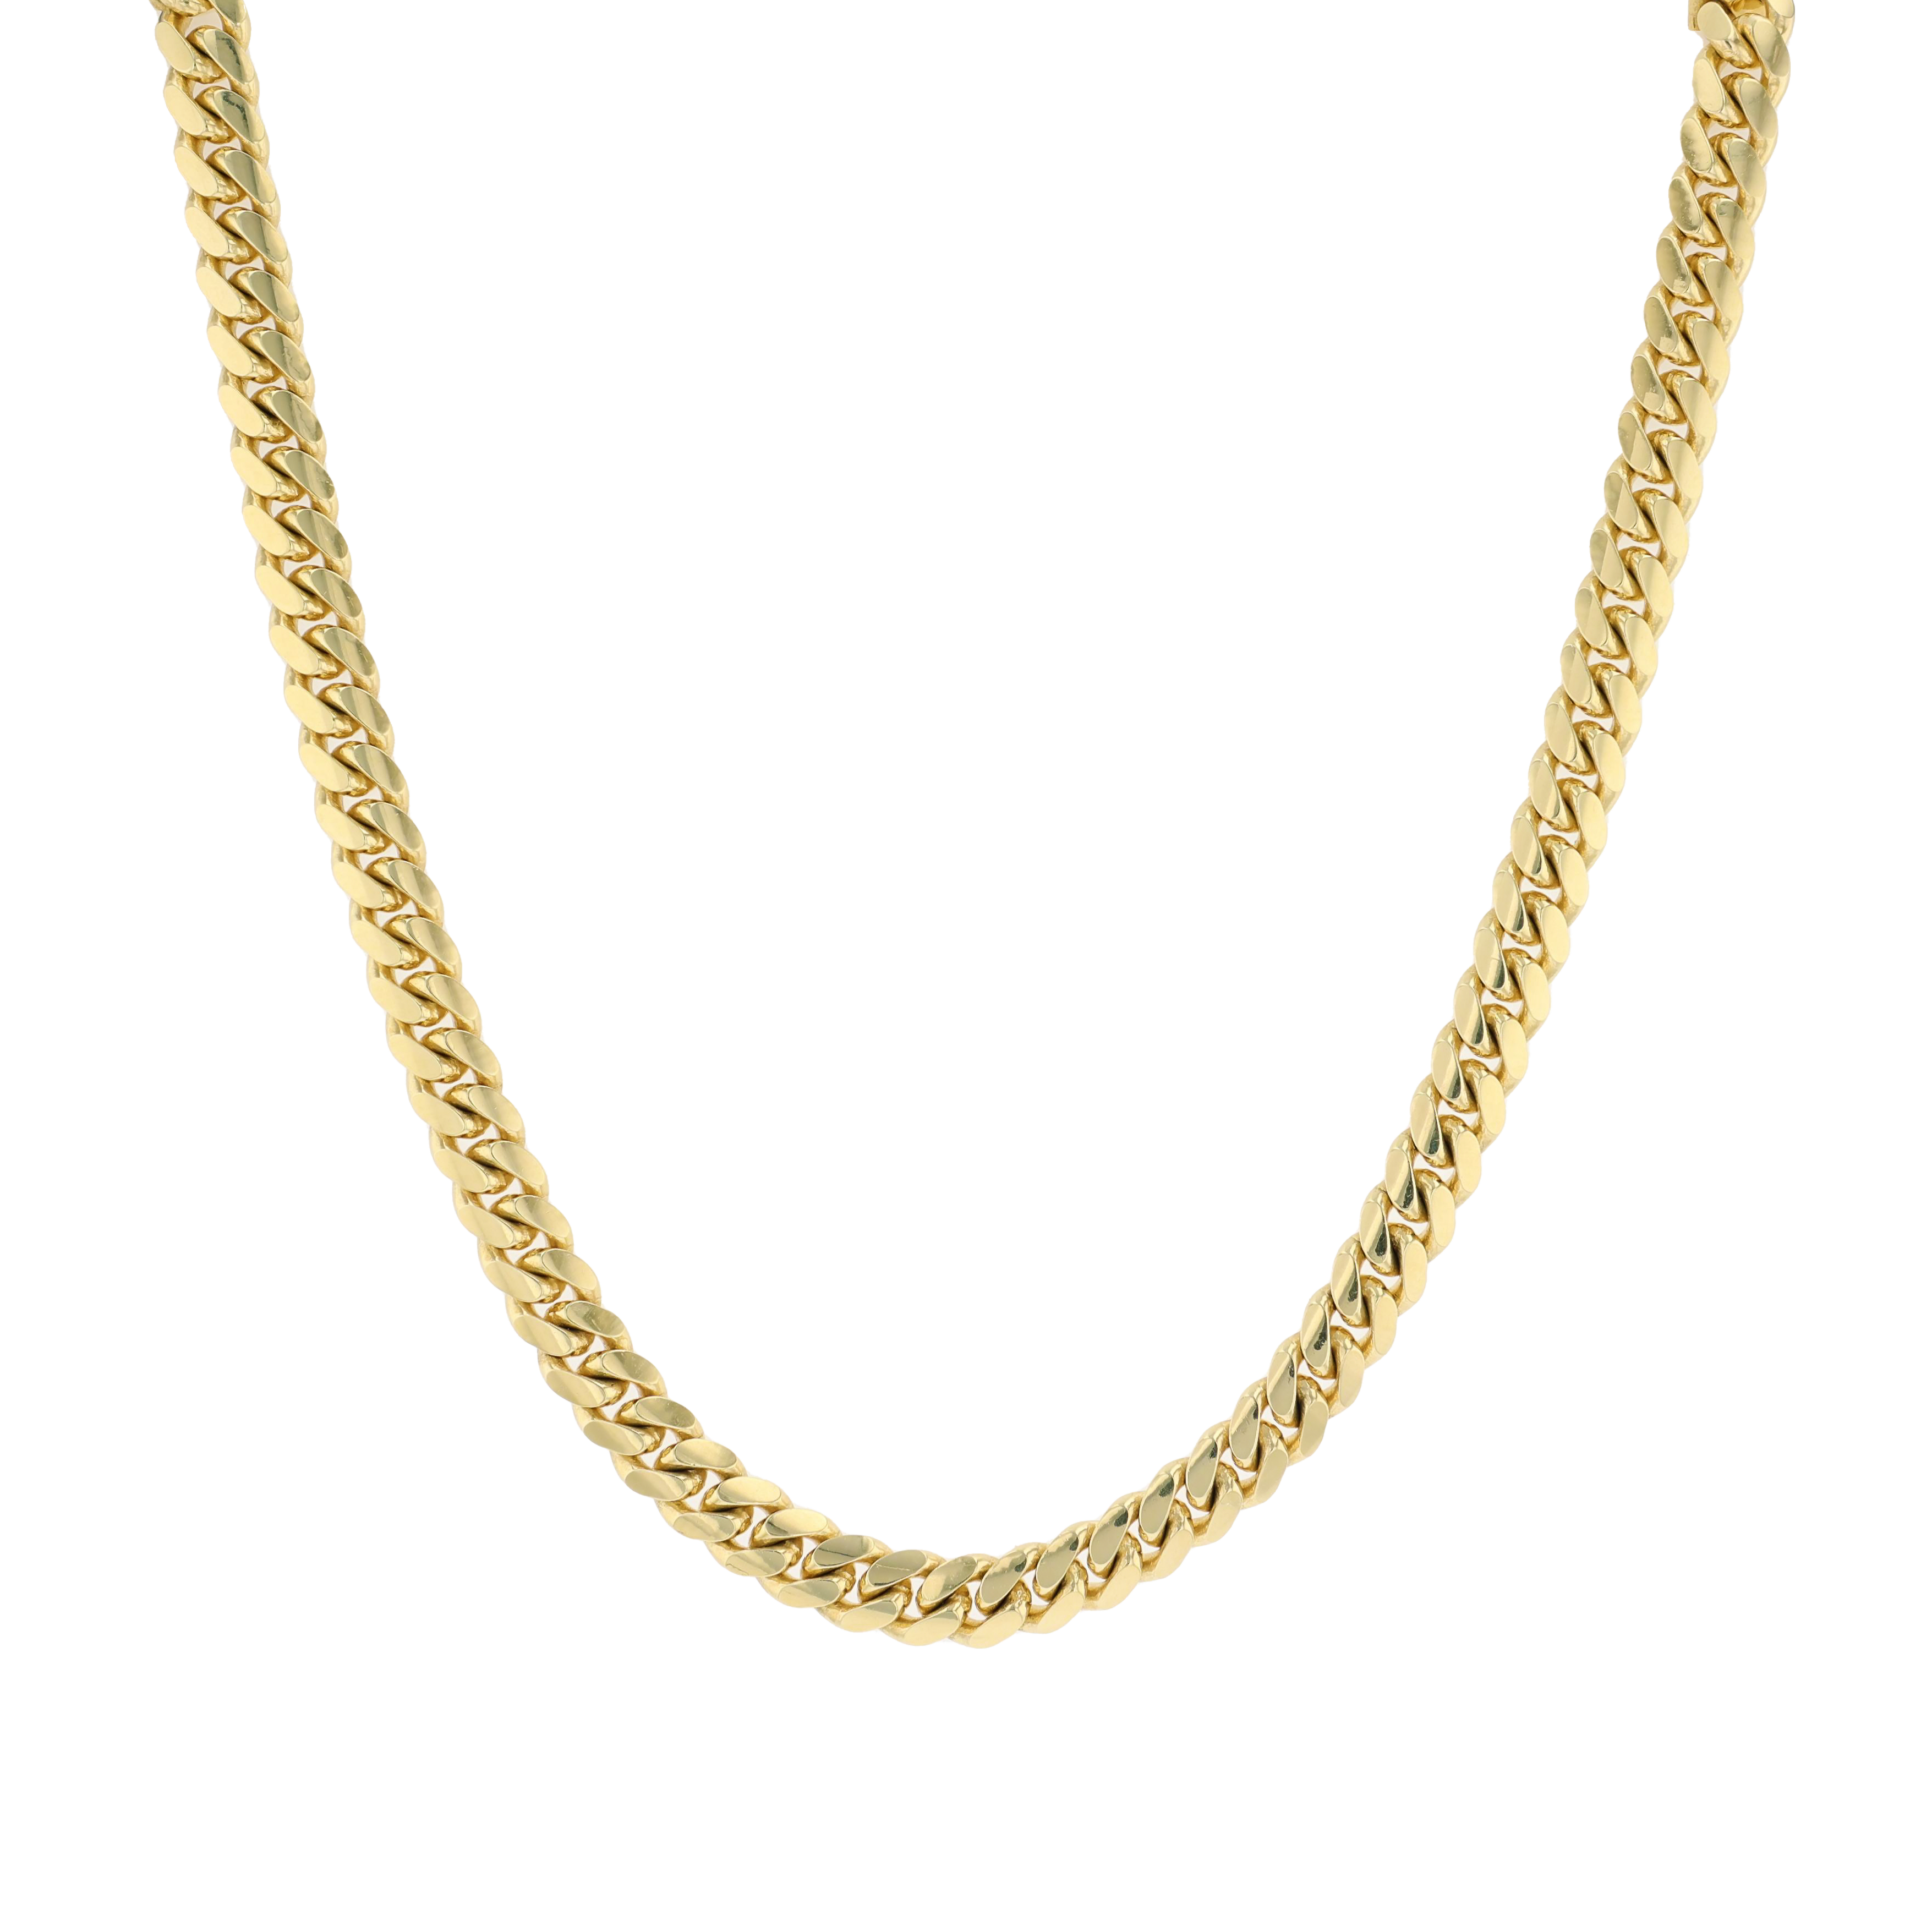 10K Yellow Gold 8.2mm Cuban Link Chain 24in